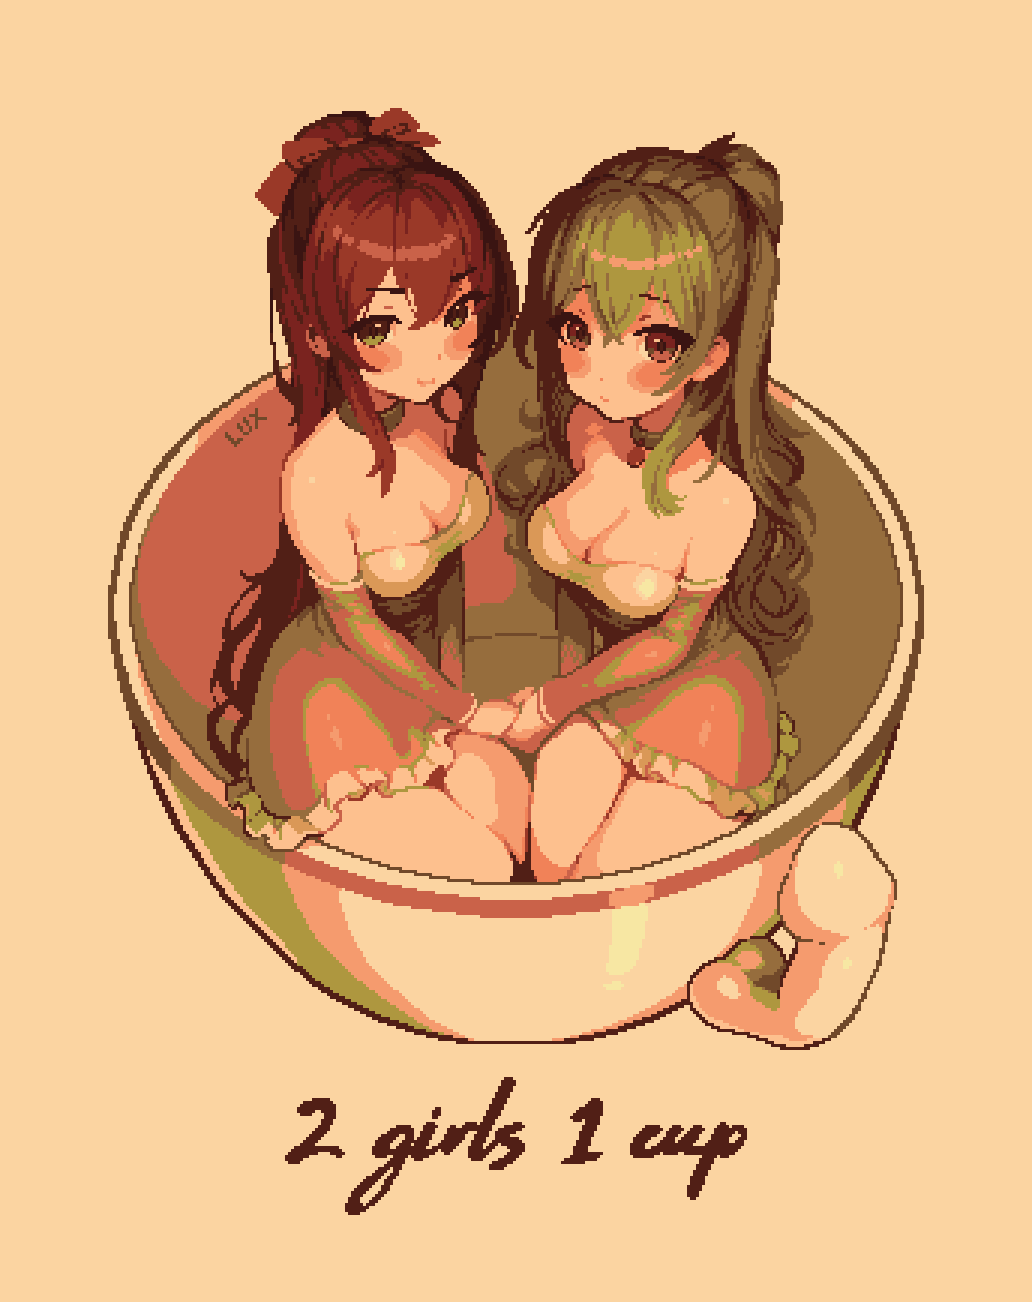 2 Girls 1 Cup   ™